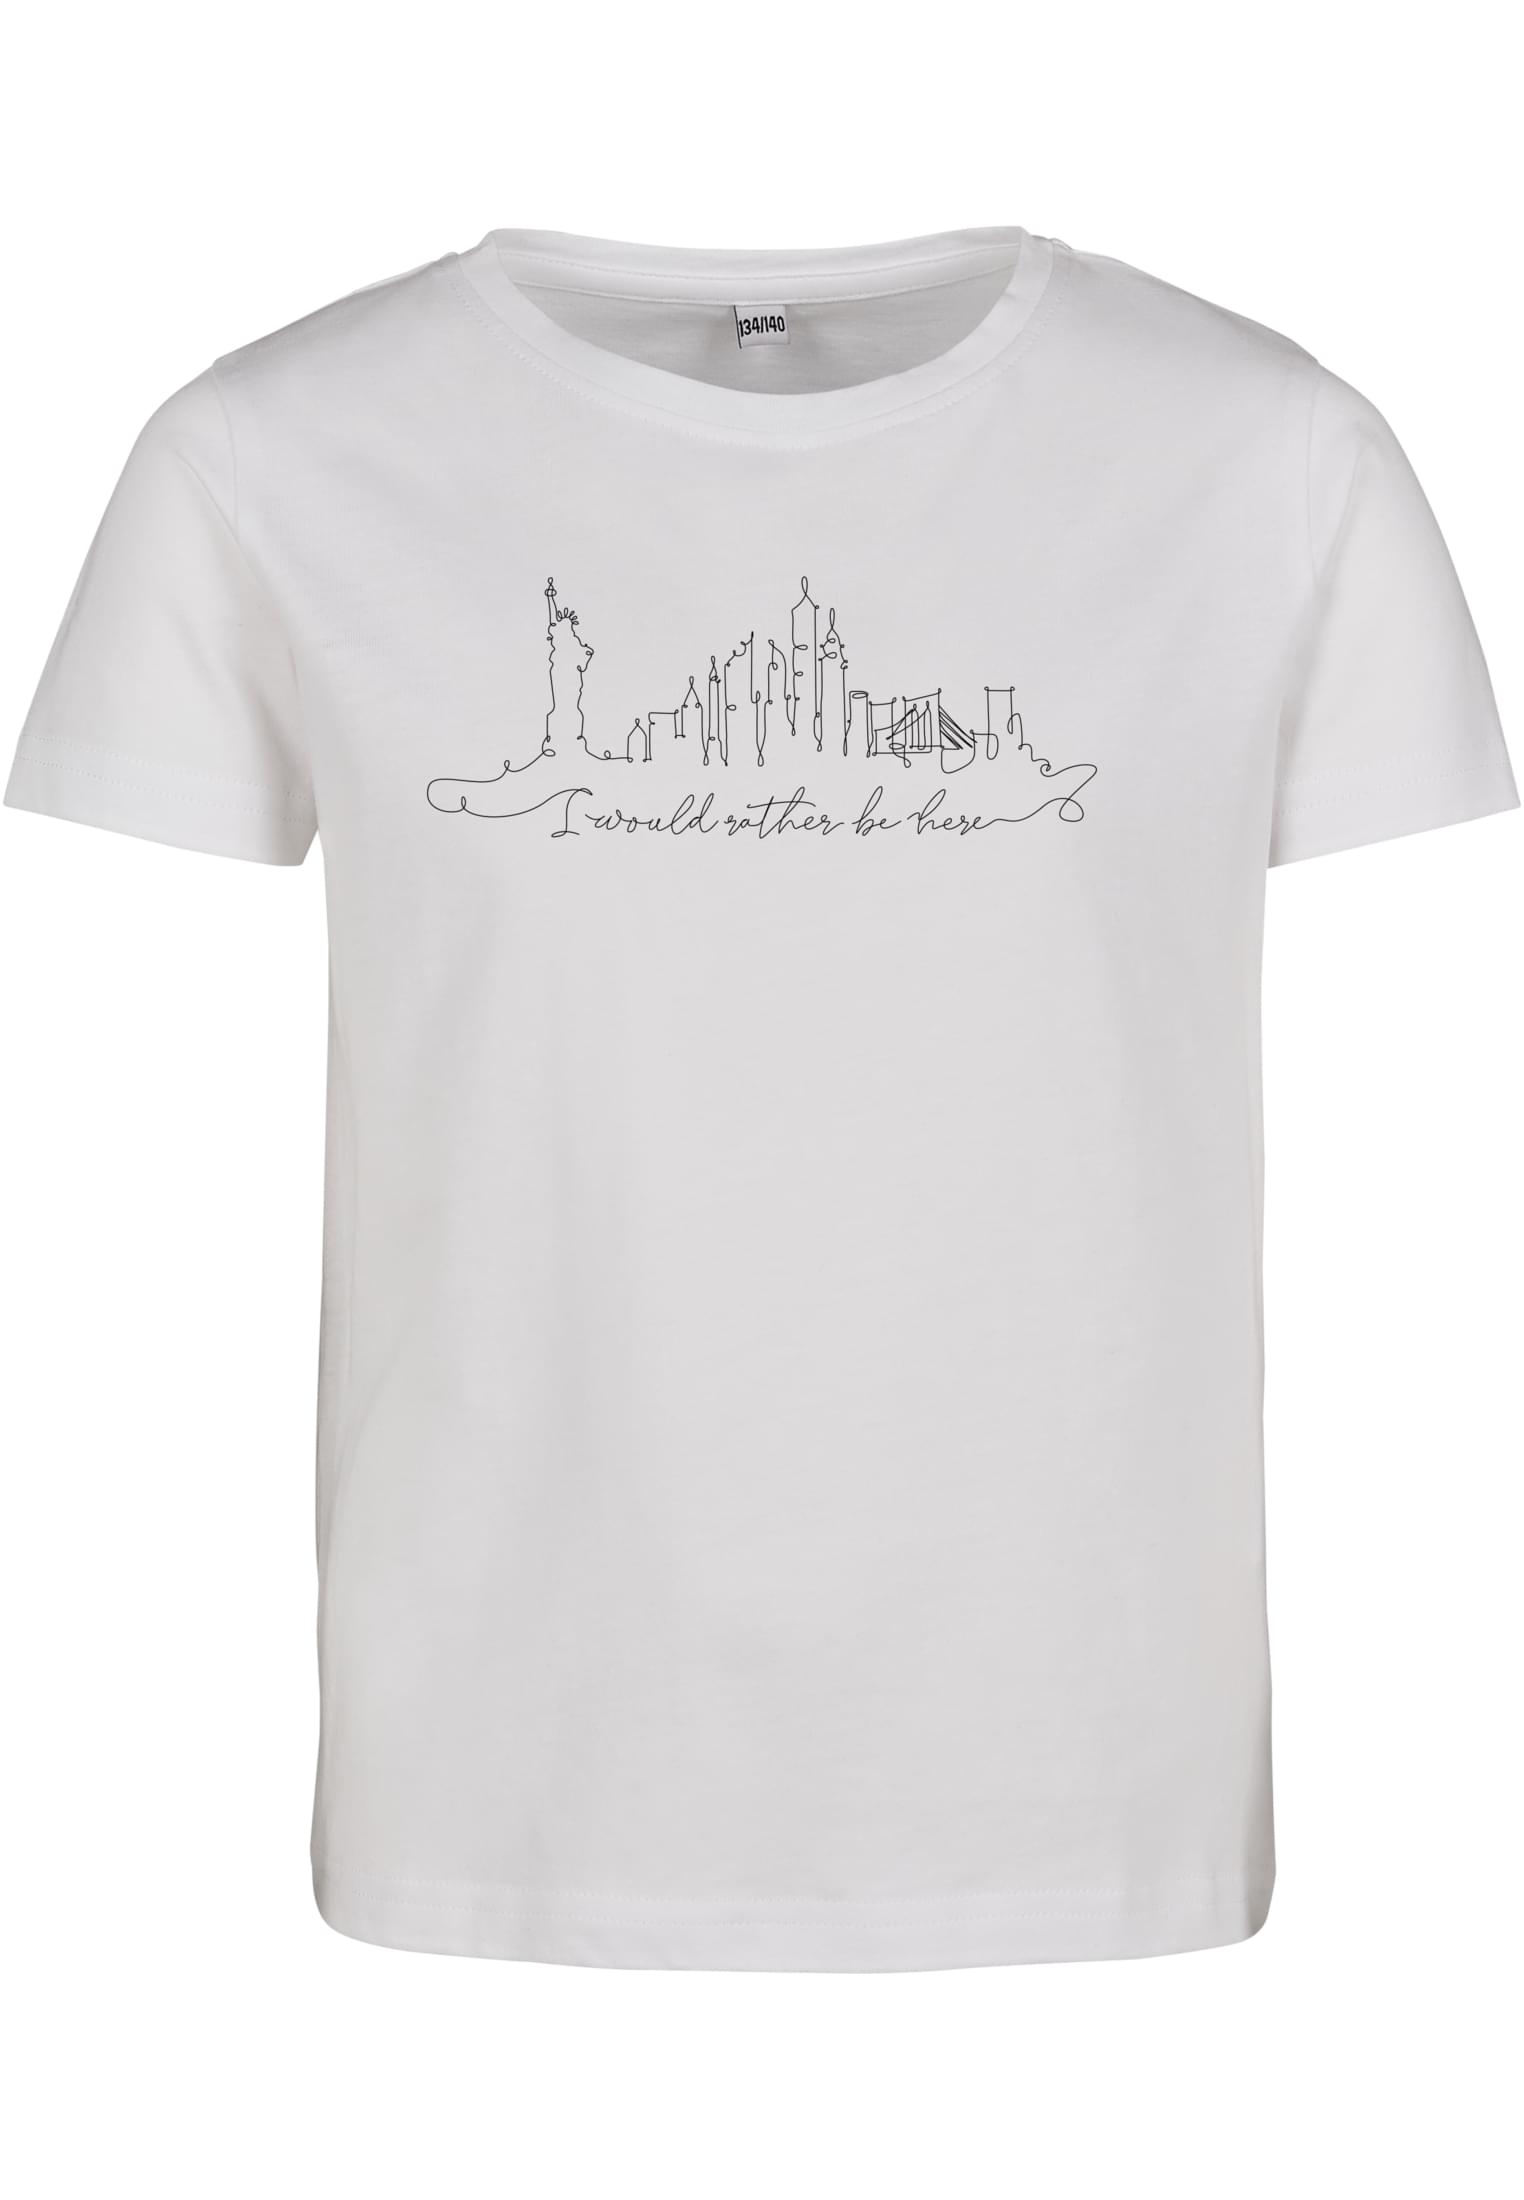 Kids want to be here t-shirt white